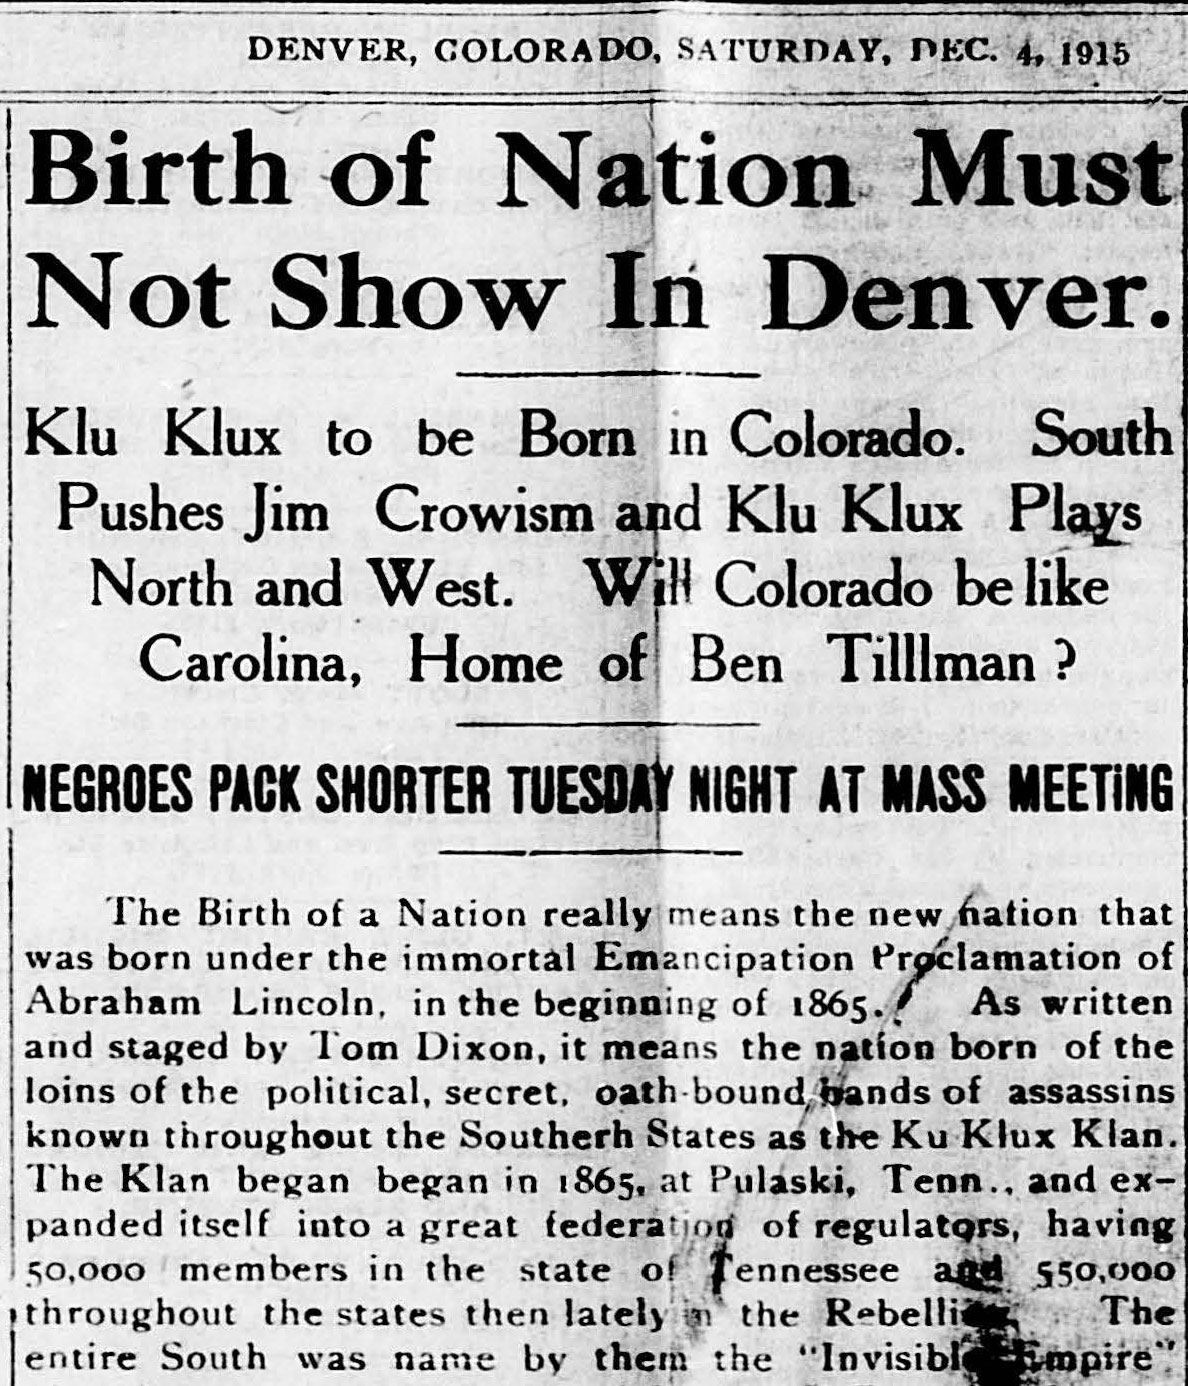 news clipping about Birth of a Nation from Denver Star 